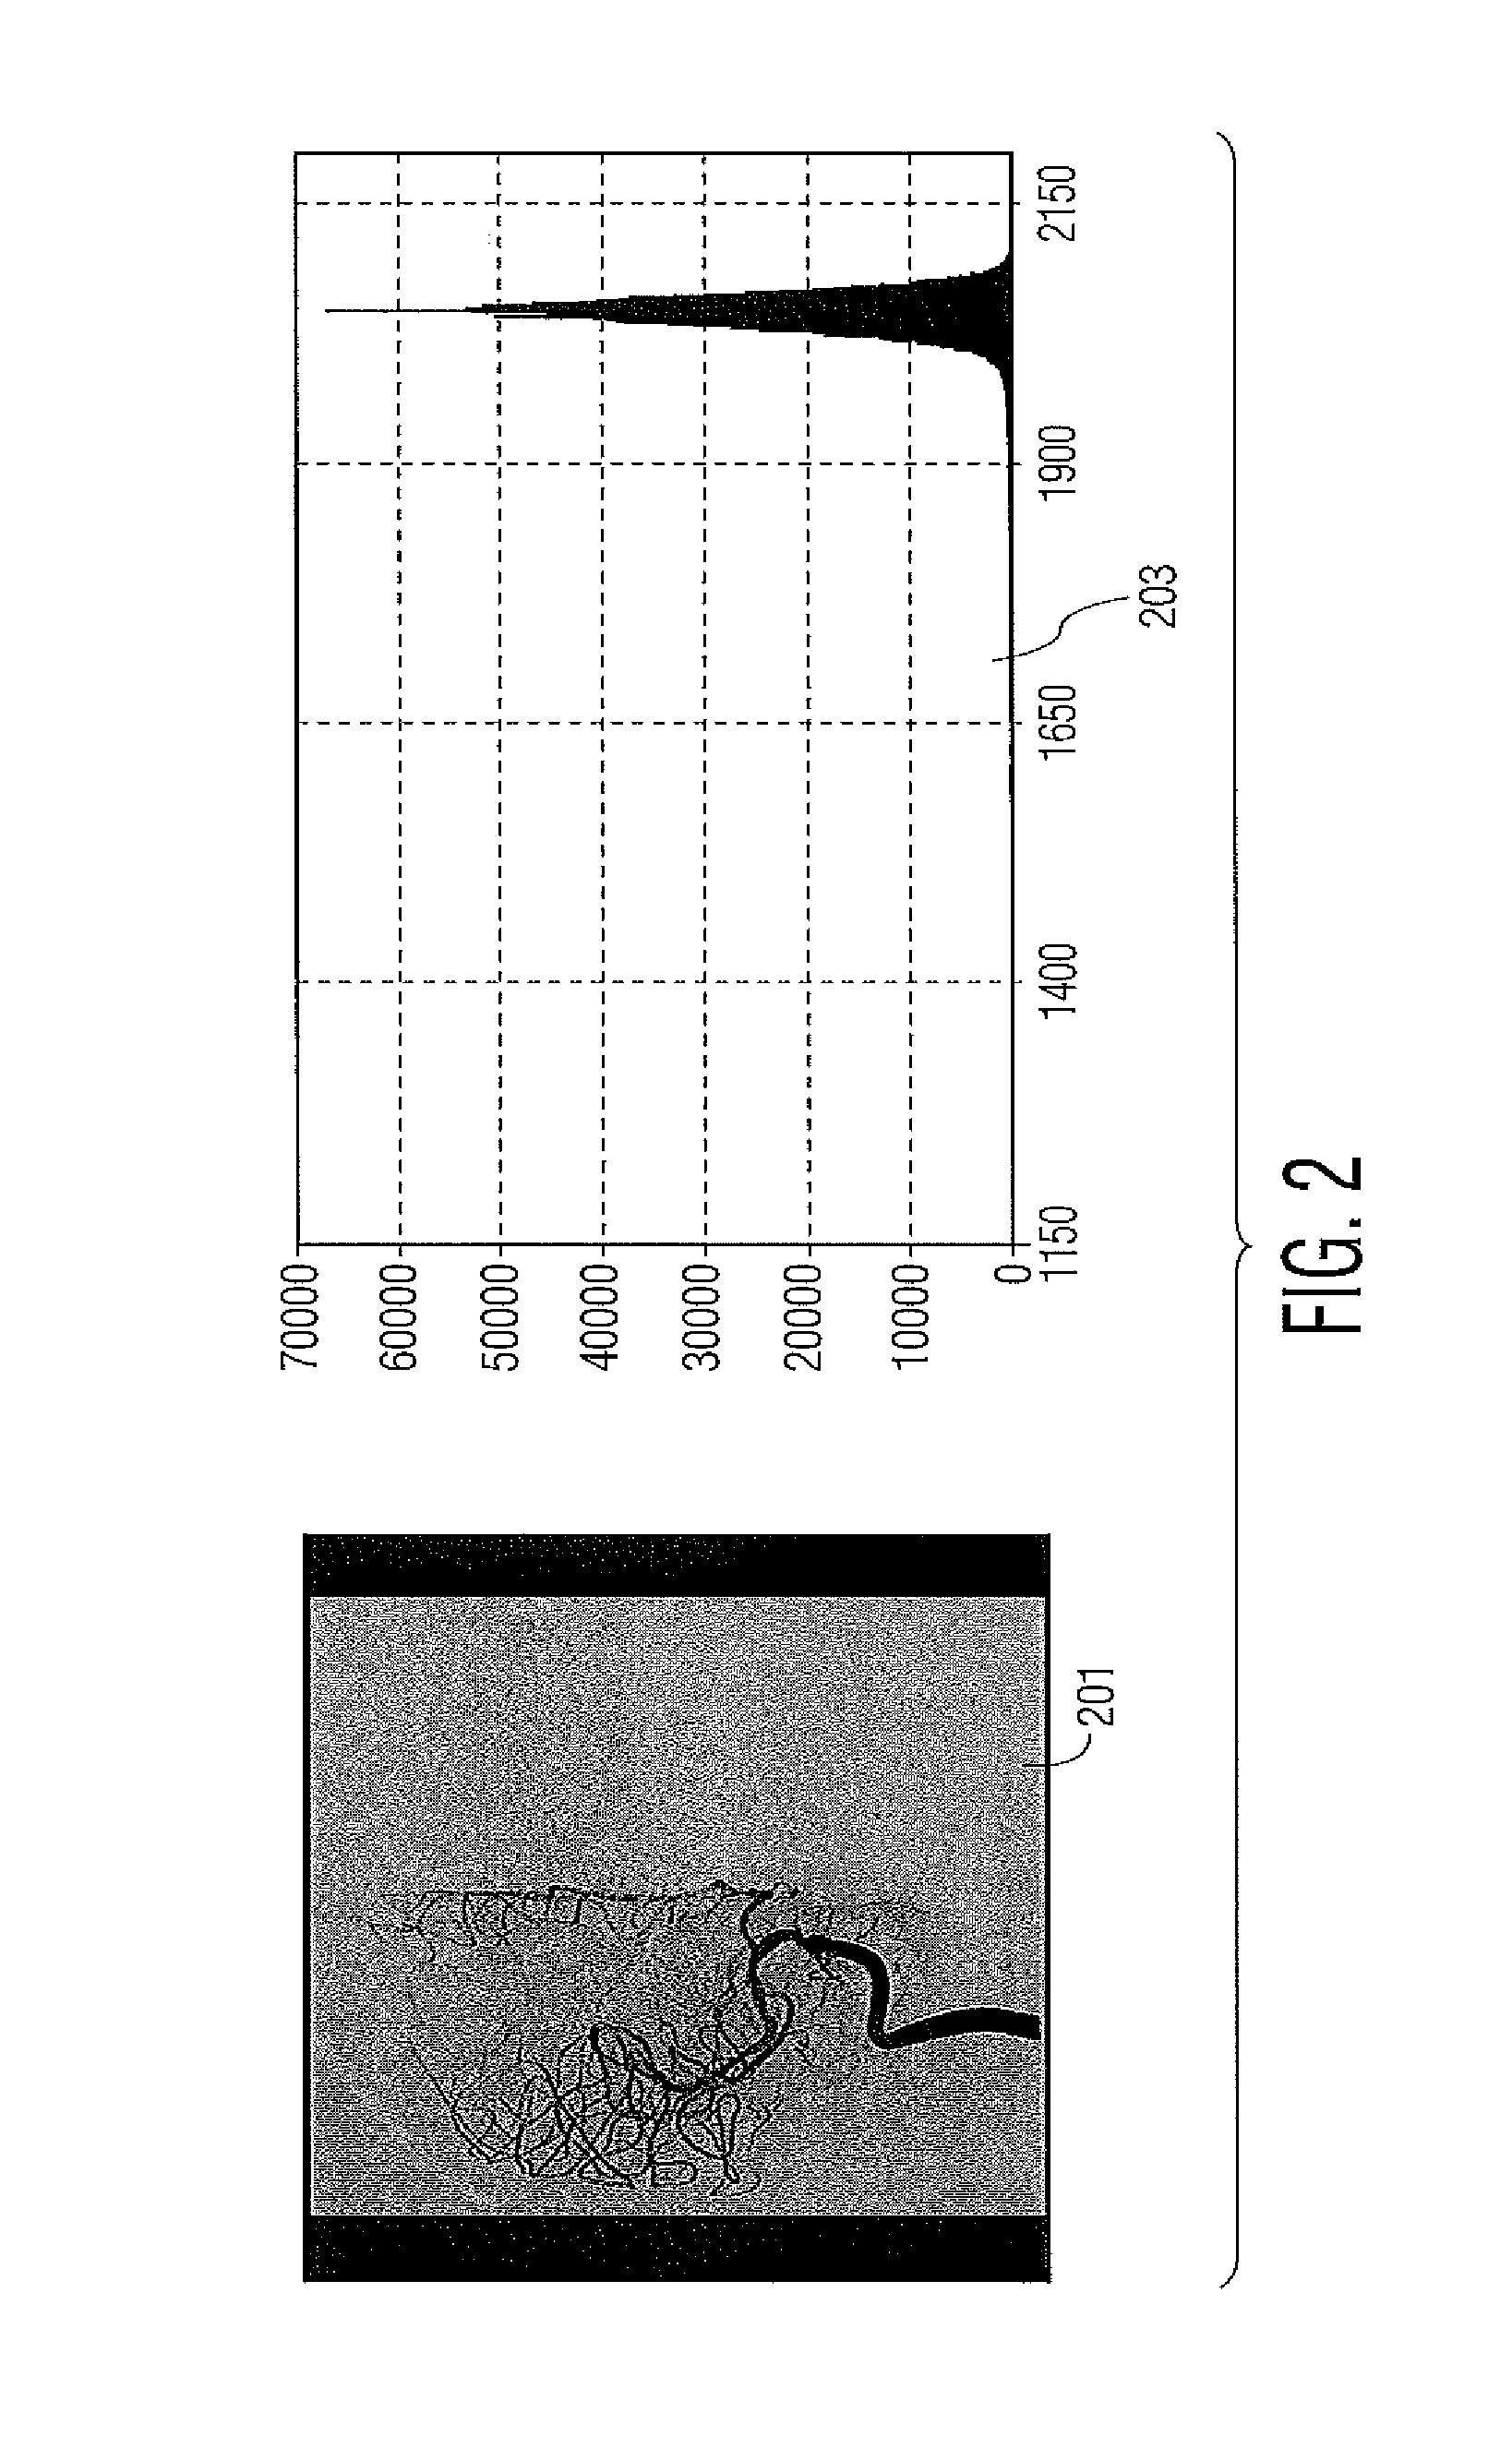 Medical image and vessel characteristic data processing system